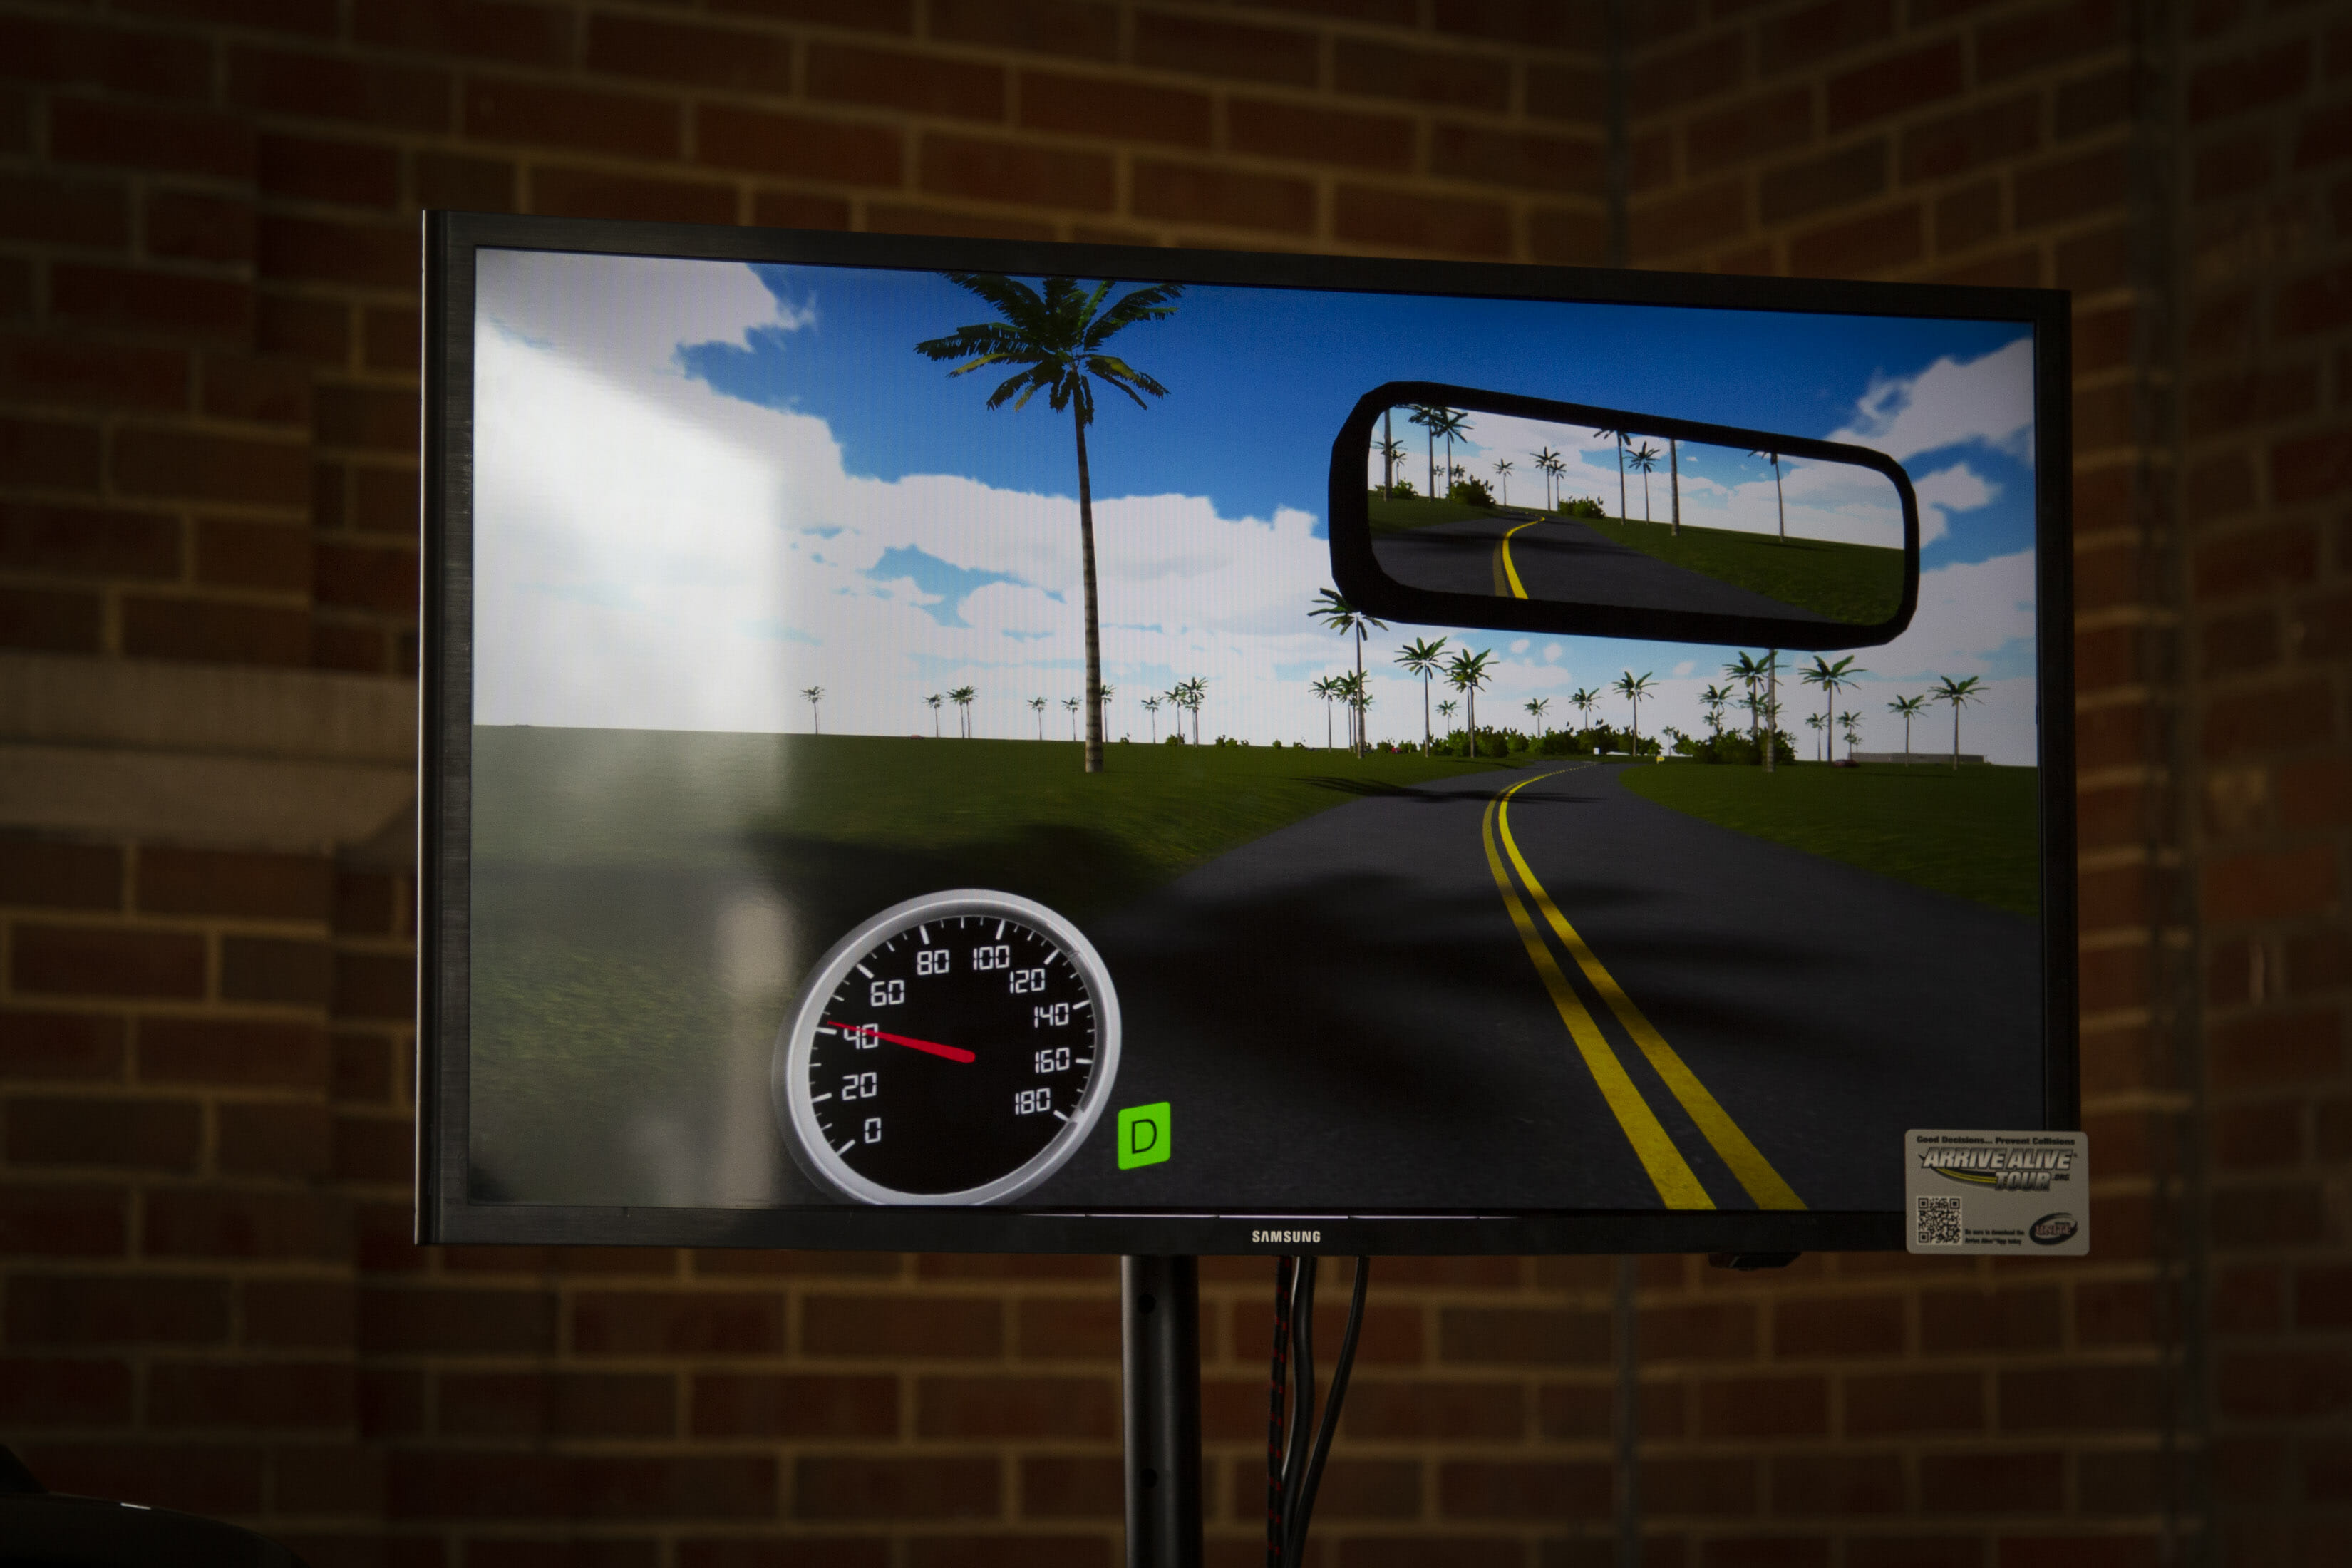 MICDS Upper School students used a simulator to find out what happens when you drive while impaired or distracted.